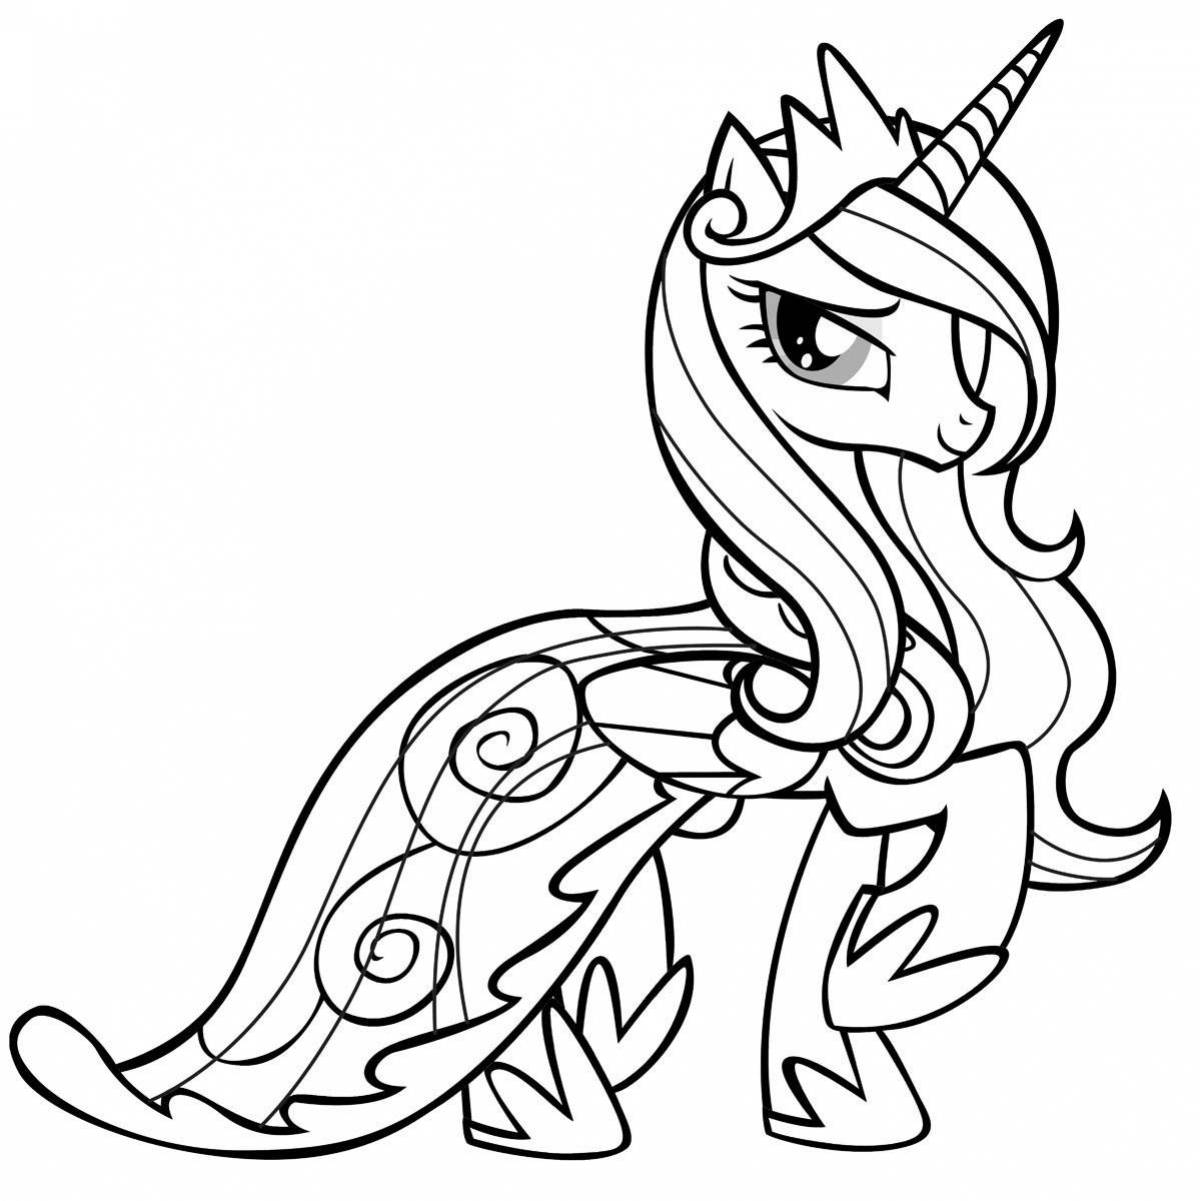 Amazing pony coloring for girls